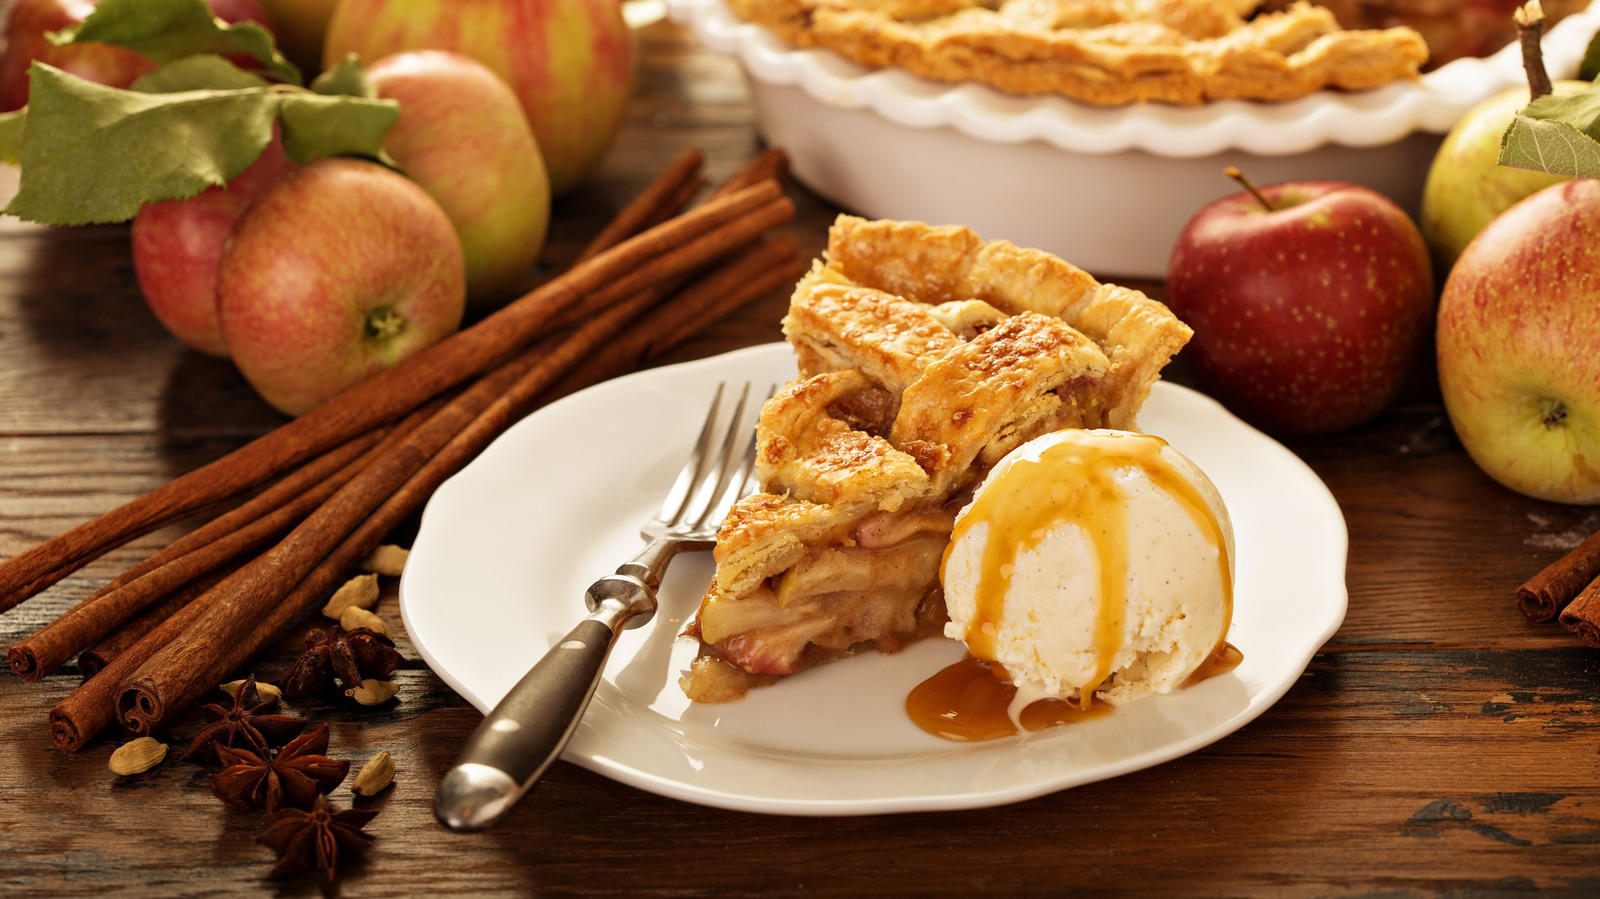 Which Part Of The US Are You From? Apple pie and ice cream